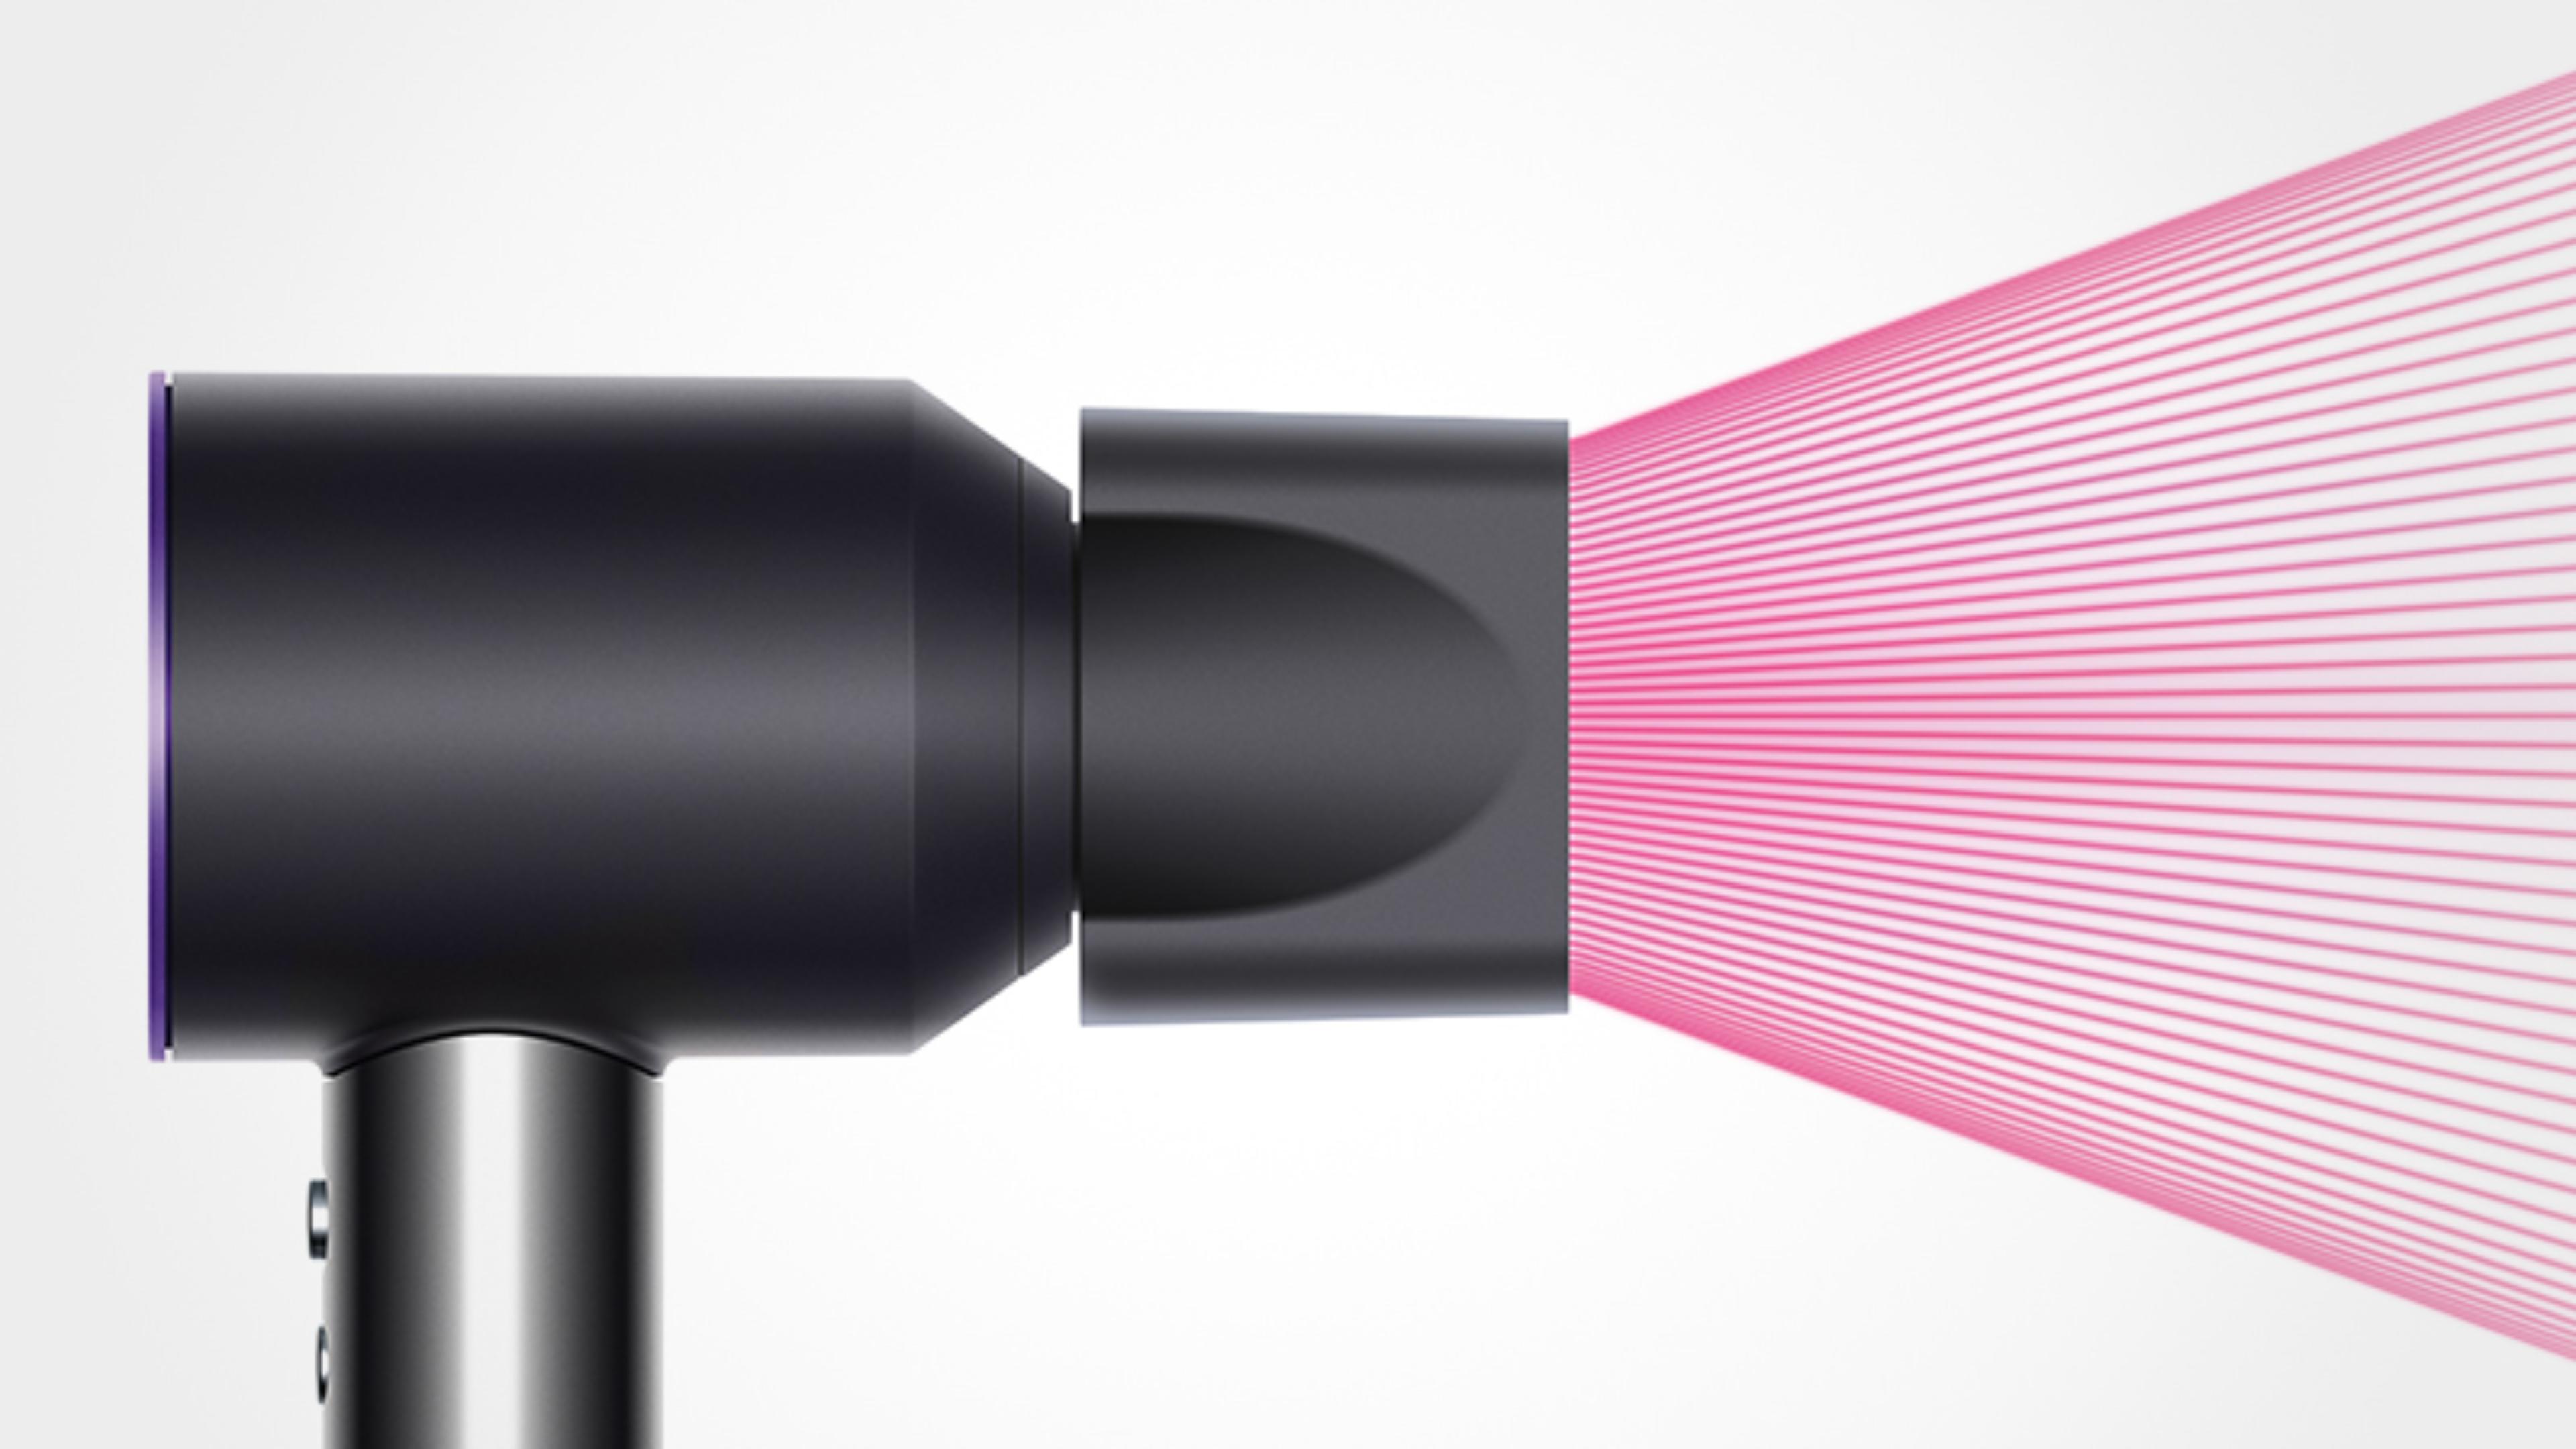 Dyson Supersonic™ hair dryer Black/Purple with Smoothing nozzle attached